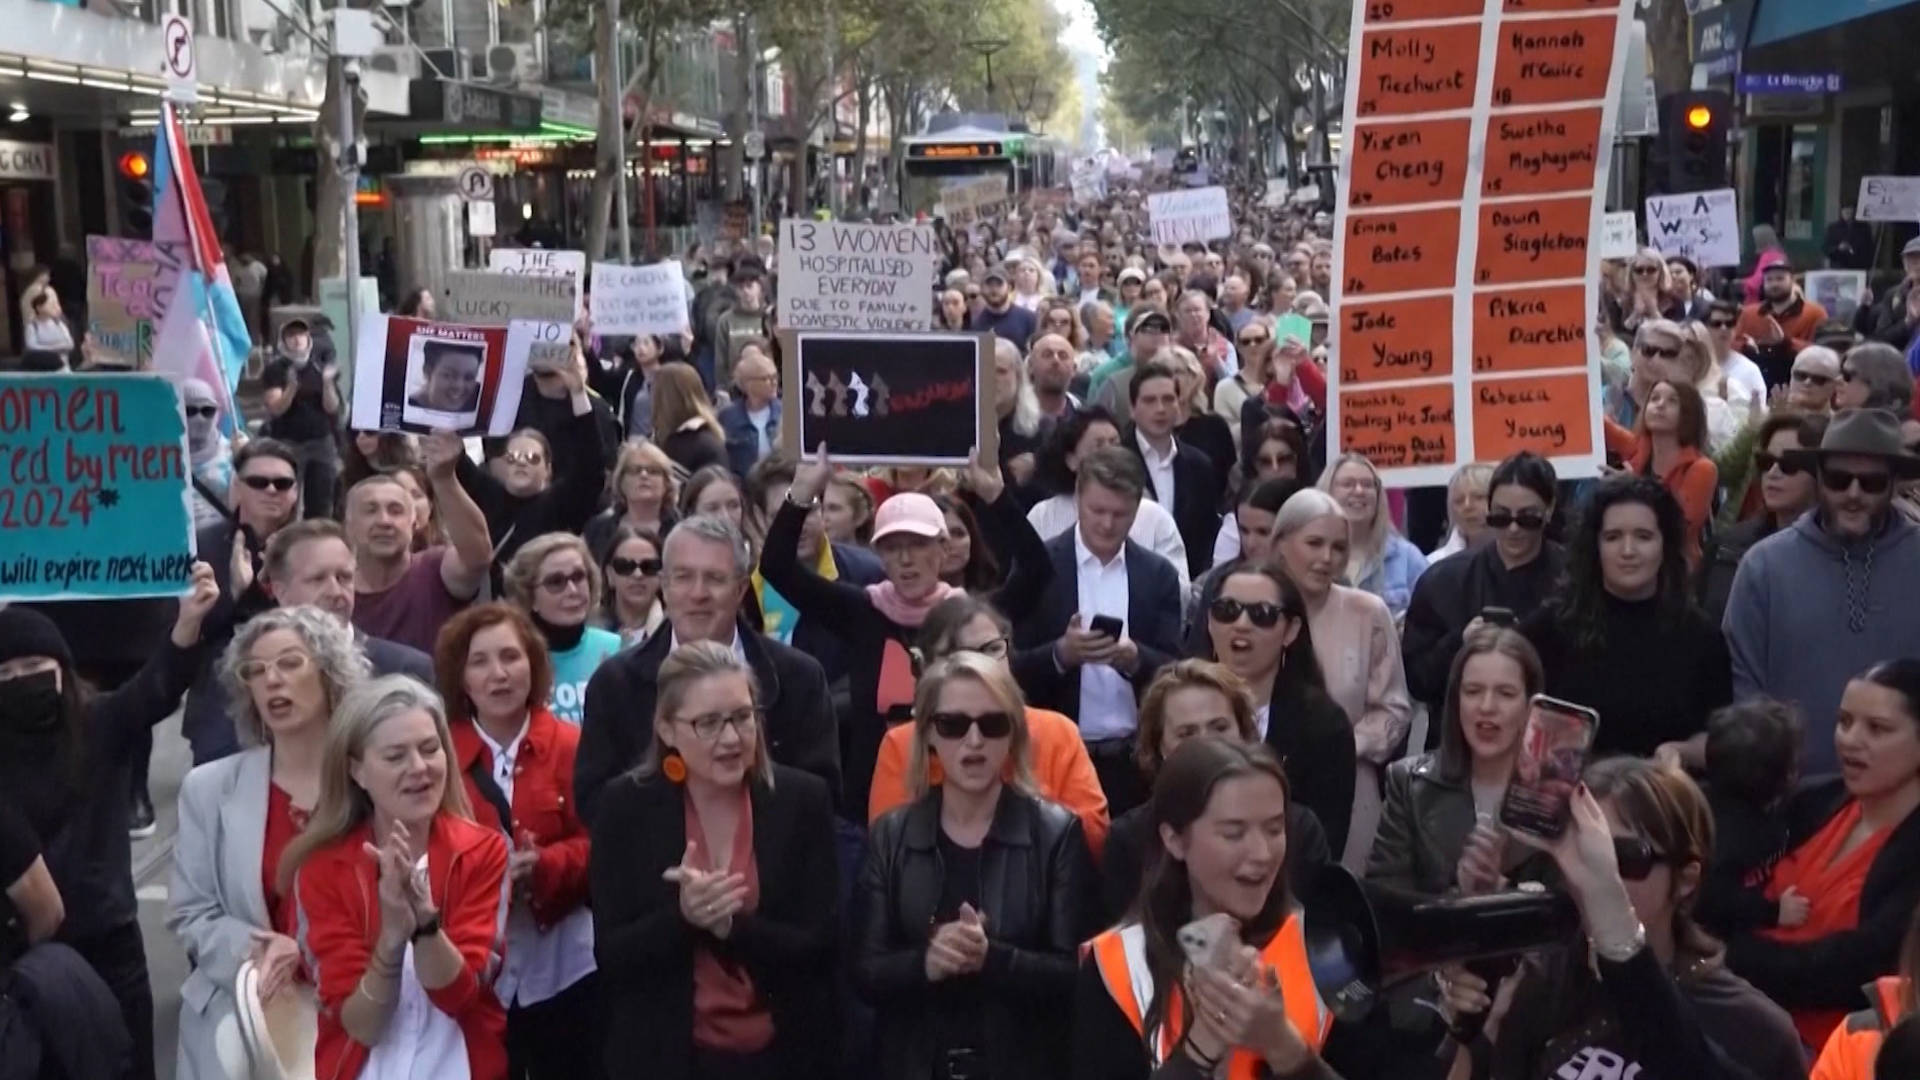 Protesters March Across Australia to Demand an End to “Epidemic” of Violence Against Women